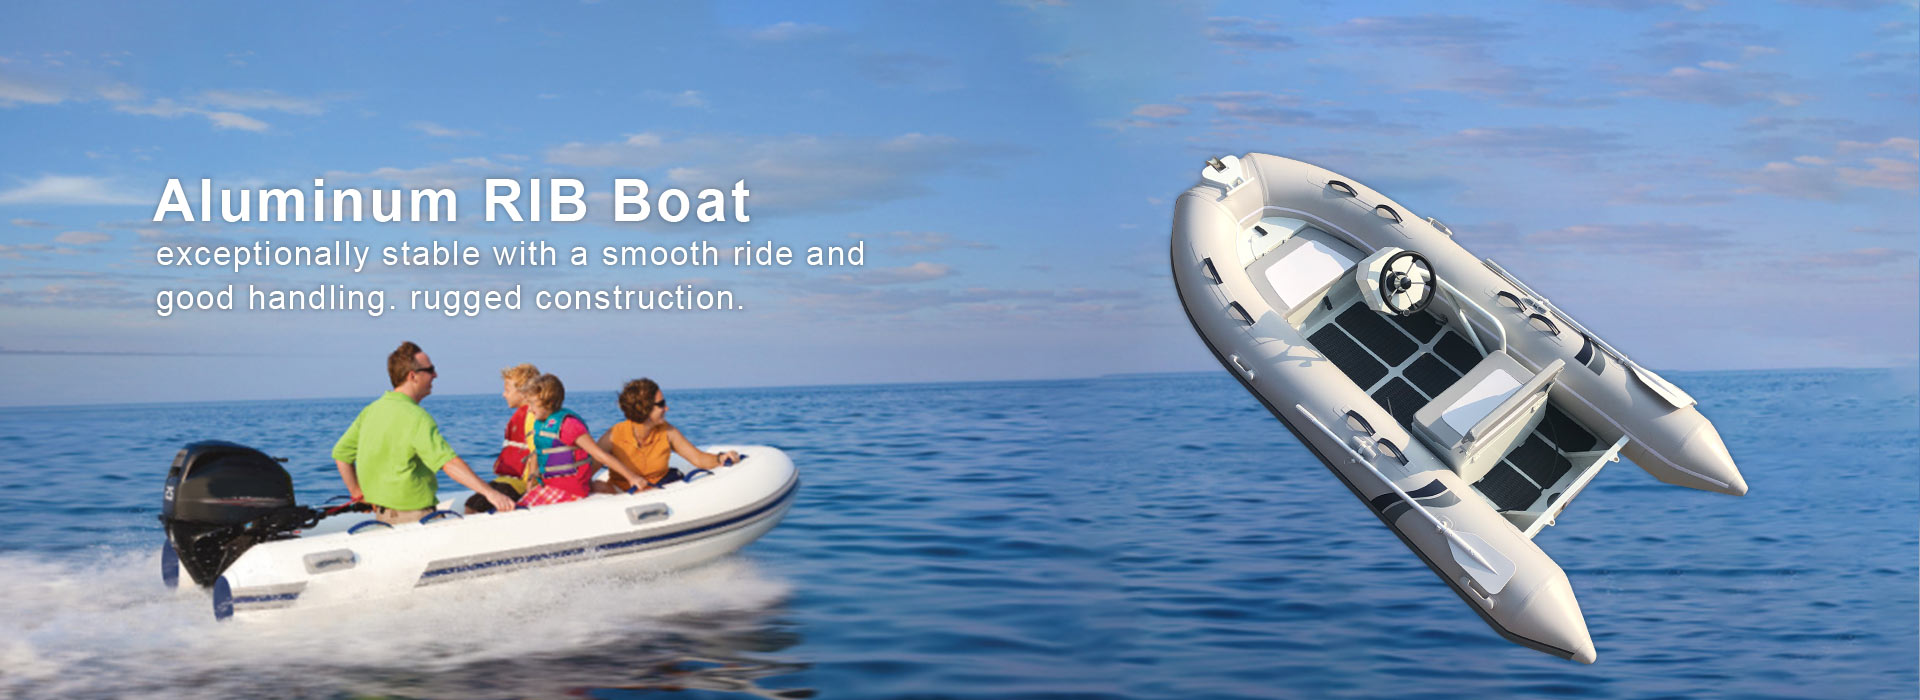 Rigid Inflatable Boat with Latest Design for Superior Aesthetics and Reliable Quality